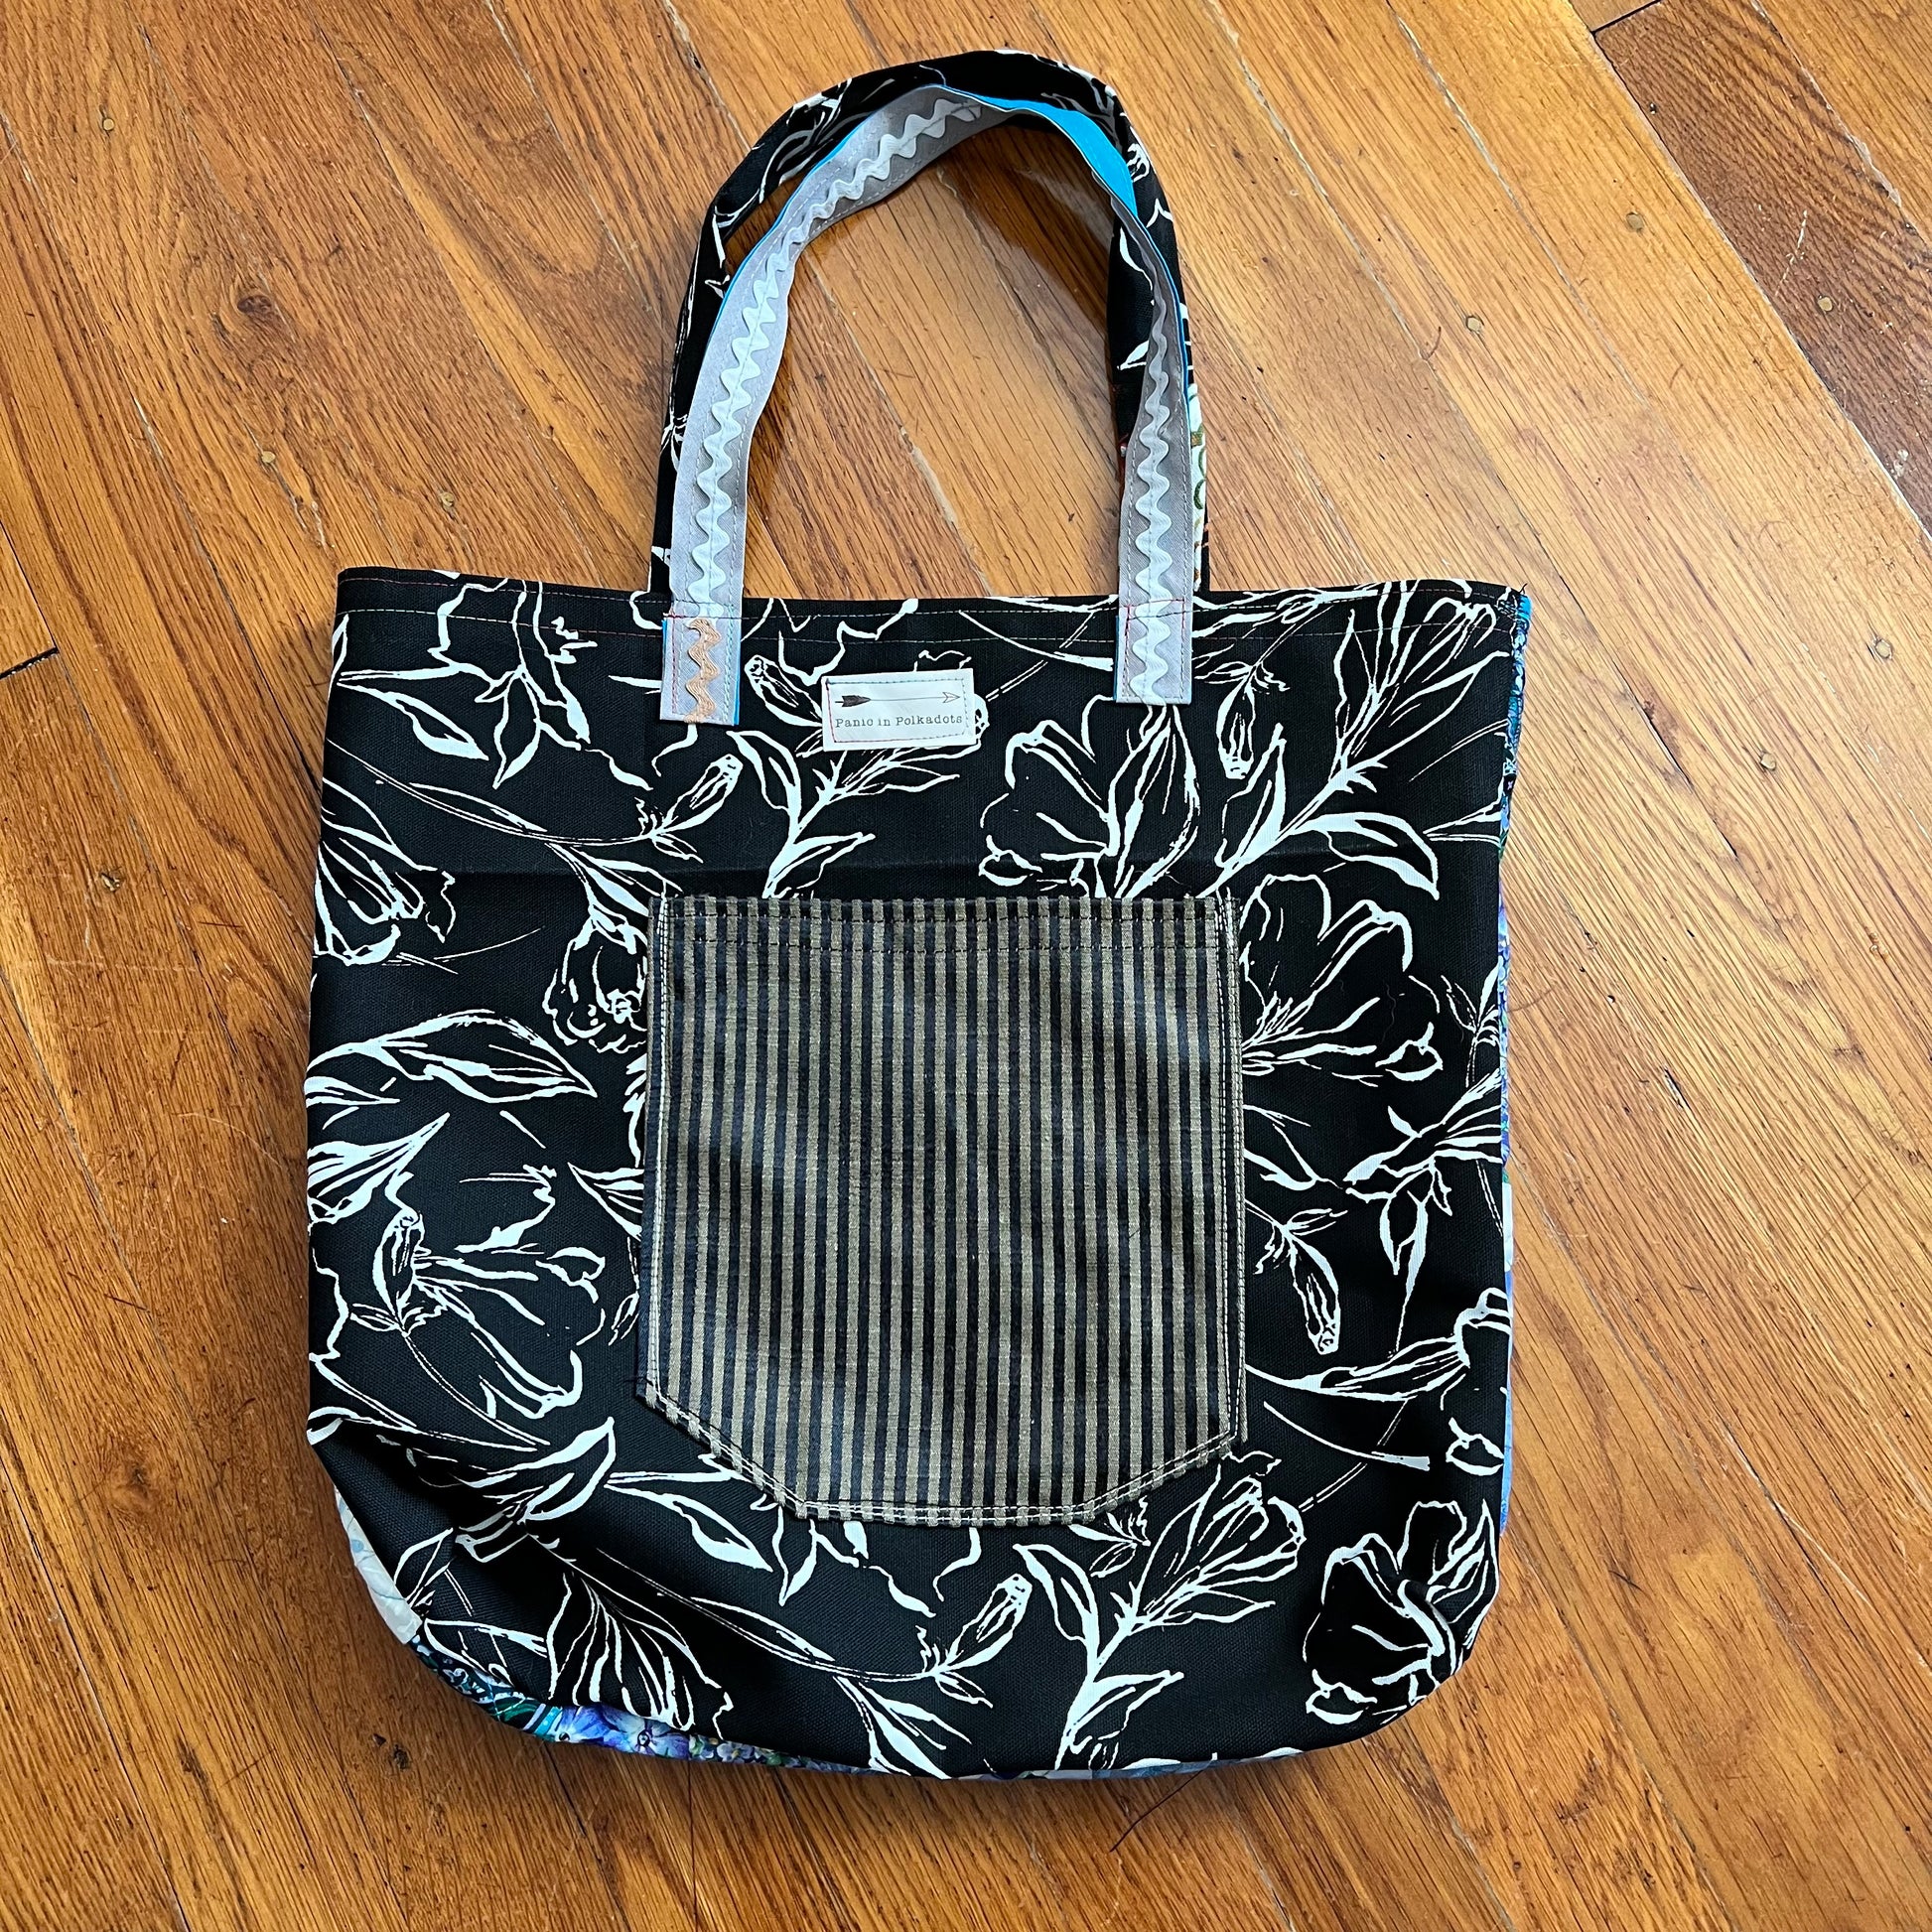 back view of tote bag, with a striped pocket and a Panic in Polkadots label